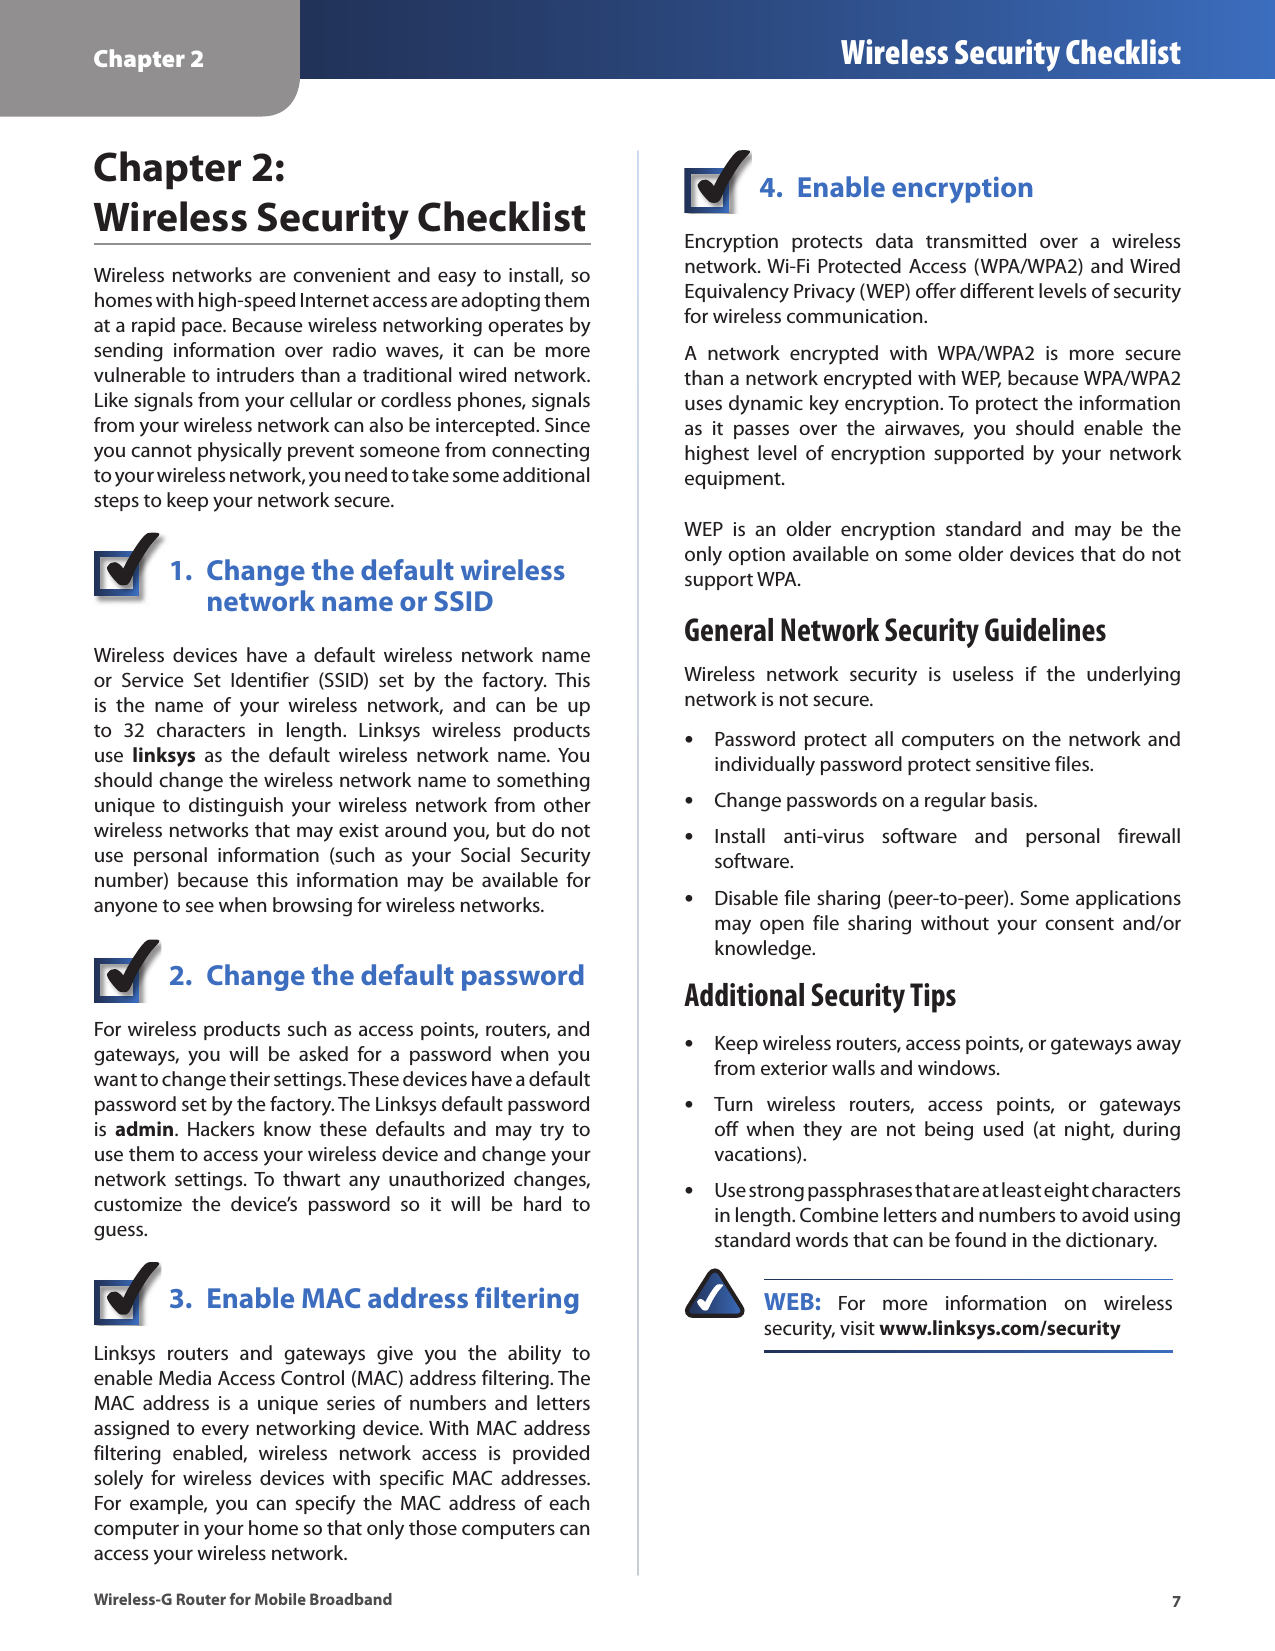 Chapter 2 Wireless Security Checklist7Wireless-G Router for Mobile BroadbandChapter 2:  Wireless Security ChecklistWireless  networks are convenient  and  easy to install, so homes with high-speed Internet access are adopting them at a rapid pace. Because wireless networking operates by sending  information  over  radio  waves,  it  can  be  more vulnerable to intruders than a traditional wired network. Like signals from your cellular or cordless phones, signals from your wireless network can also be intercepted. Since you cannot physically prevent someone from connecting to your wireless network, you need to take some additional steps to keep your network secure. 1.  Change the default wireless    network name or SSIDWireless  devices  have  a  default  wireless  network  name or  Service  Set  Identifier  (SSID)  set  by  the  factory.  This is  the  name  of  your  wireless  network,  and  can  be  up to  32  characters  in  length.  Linksys  wireless  products use  linksys  as  the  default  wireless  network  name.  You should change the wireless network name to something unique  to distinguish  your wireless  network from  other wireless networks that may exist around you, but do not use  personal  information  (such  as  your  Social  Security number)  because  this  information  may  be  available  for anyone to see when browsing for wireless networks. 2.  Change the default passwordFor wireless products such as access points, routers, and gateways,  you  will  be  asked  for  a  password  when  you want to change their settings. These devices have a default password set by the factory. The Linksys default password is  admin.  Hackers  know  these  defaults  and  may  try  to use them to access your wireless device and change your network  settings. To  thwart  any  unauthorized  changes, customize  the  device’s  password  so  it  will  be  hard  to guess.3.  Enable MAC address filteringLinksys  routers  and  gateways  give  you  the  ability  to enable Media Access Control (MAC) address filtering. The MAC  address  is  a  unique  series  of  numbers  and  letters assigned to every networking device. With MAC address filtering  enabled,  wireless  network  access  is  provided solely  for  wireless  devices  with  specific  MAC  addresses. For  example,  you  can  specify  the  MAC  address  of  each computer in your home so that only those computers can access your wireless network. 4.  Enable encryptionEncryption  protects  data  transmitted  over  a  wireless network. Wi-Fi Protected  Access (WPA/WPA2) and Wired Equivalency Privacy (WEP) offer different levels of security for wireless communication.A  network  encrypted  with  WPA/WPA2  is  more  secure than a network encrypted with WEP, because WPA/WPA2 uses dynamic key encryption. To protect the information as  it  passes  over  the  airwaves,  you  should  enable  the highest  level  of  encryption  supported  by  your  network equipment. WEP  is  an  older  encryption  standard  and  may  be  the only option available on some older devices that do not support WPA.General Network Security GuidelinesWireless  network  security  is  useless  if  the  underlying network is not secure. Password protect  all computers on  the network  and individually password protect sensitive files.Change passwords on a regular basis.Install  anti-virus  software  and  personal  firewall software.Disable file sharing (peer-to-peer). Some applications may  open  file  sharing  without  your  consent  and/or knowledge.Additional Security TipsKeep wireless routers, access points, or gateways away from exterior walls and windows.Turn  wireless  routers,  access  points,  or  gateways off  when  they  are  not  being  used  (at  night,  during vacations).Use strong passphrases that are at least eight characters in length. Combine letters and numbers to avoid using standard words that can be found in the dictionary. WEB:  For  more  information  on  wireless security, visit www.linksys.com/security•••••••